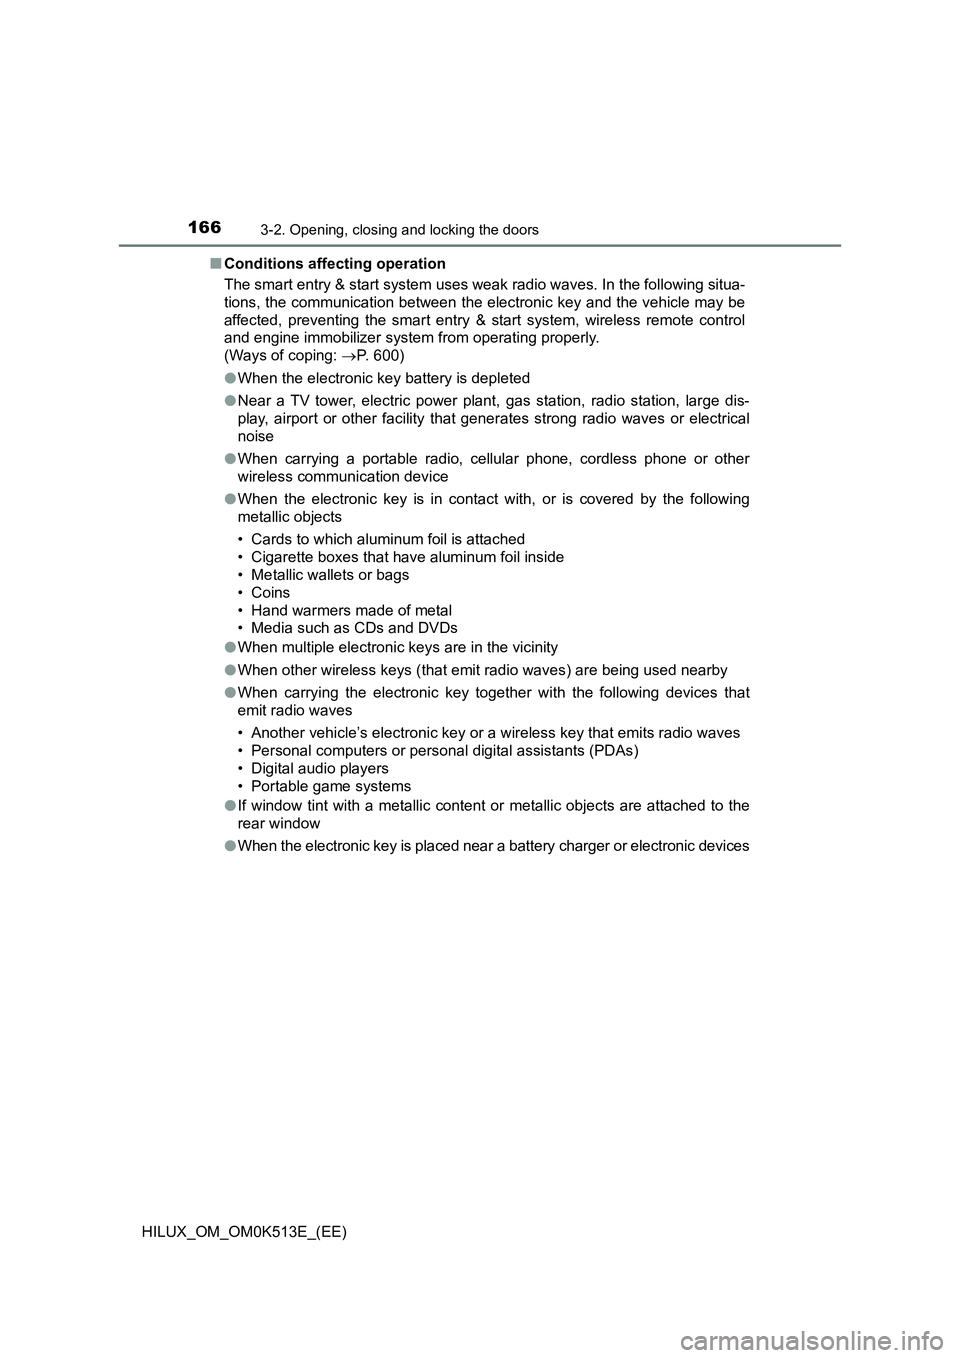 TOYOTA HILUX 2021  Owners Manual (in English) 1663-2. Opening, closing and locking the doors
HILUX_OM_OM0K513E_(EE) 
�Q Conditions affecting operation 
The smart entry & start system uses weak radio waves. In the following situa- 
tions, the comm